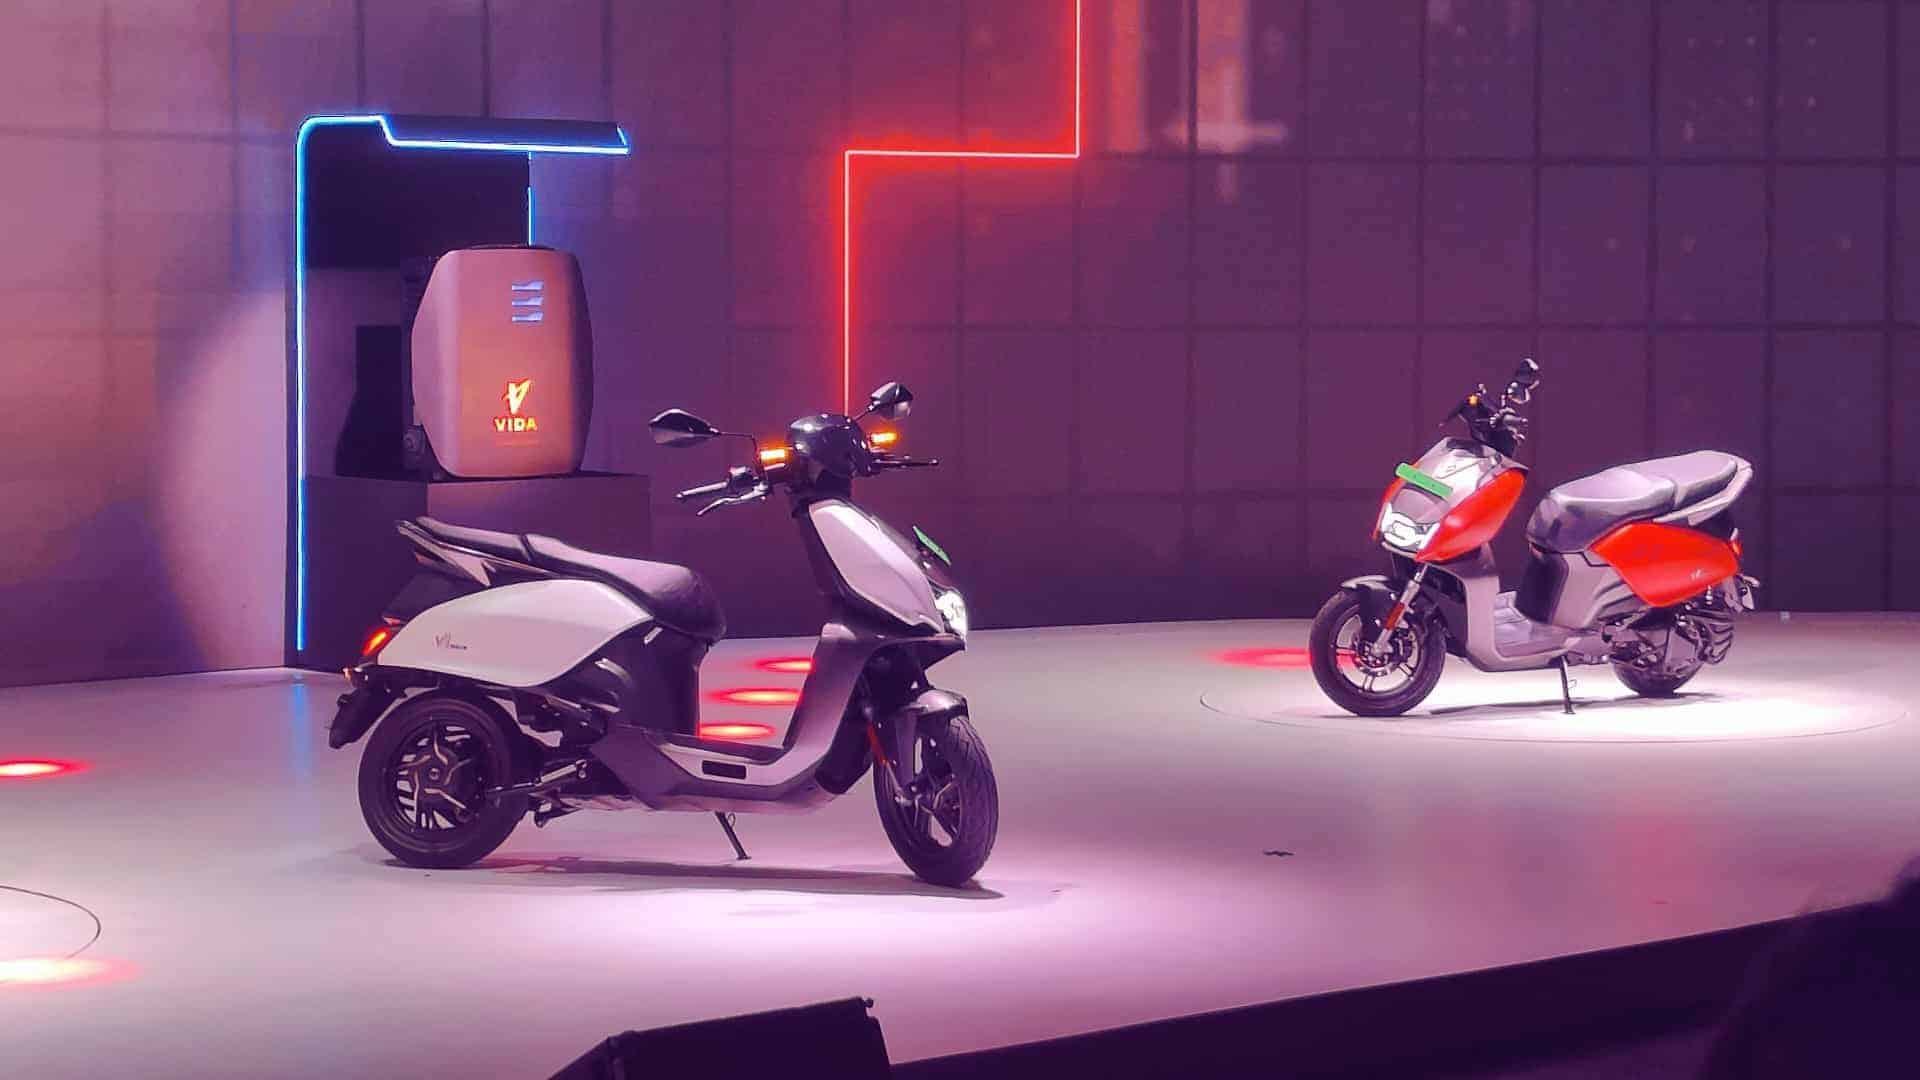 Hero MotoCorp commences deliveries of VIDA V1 electric scooter